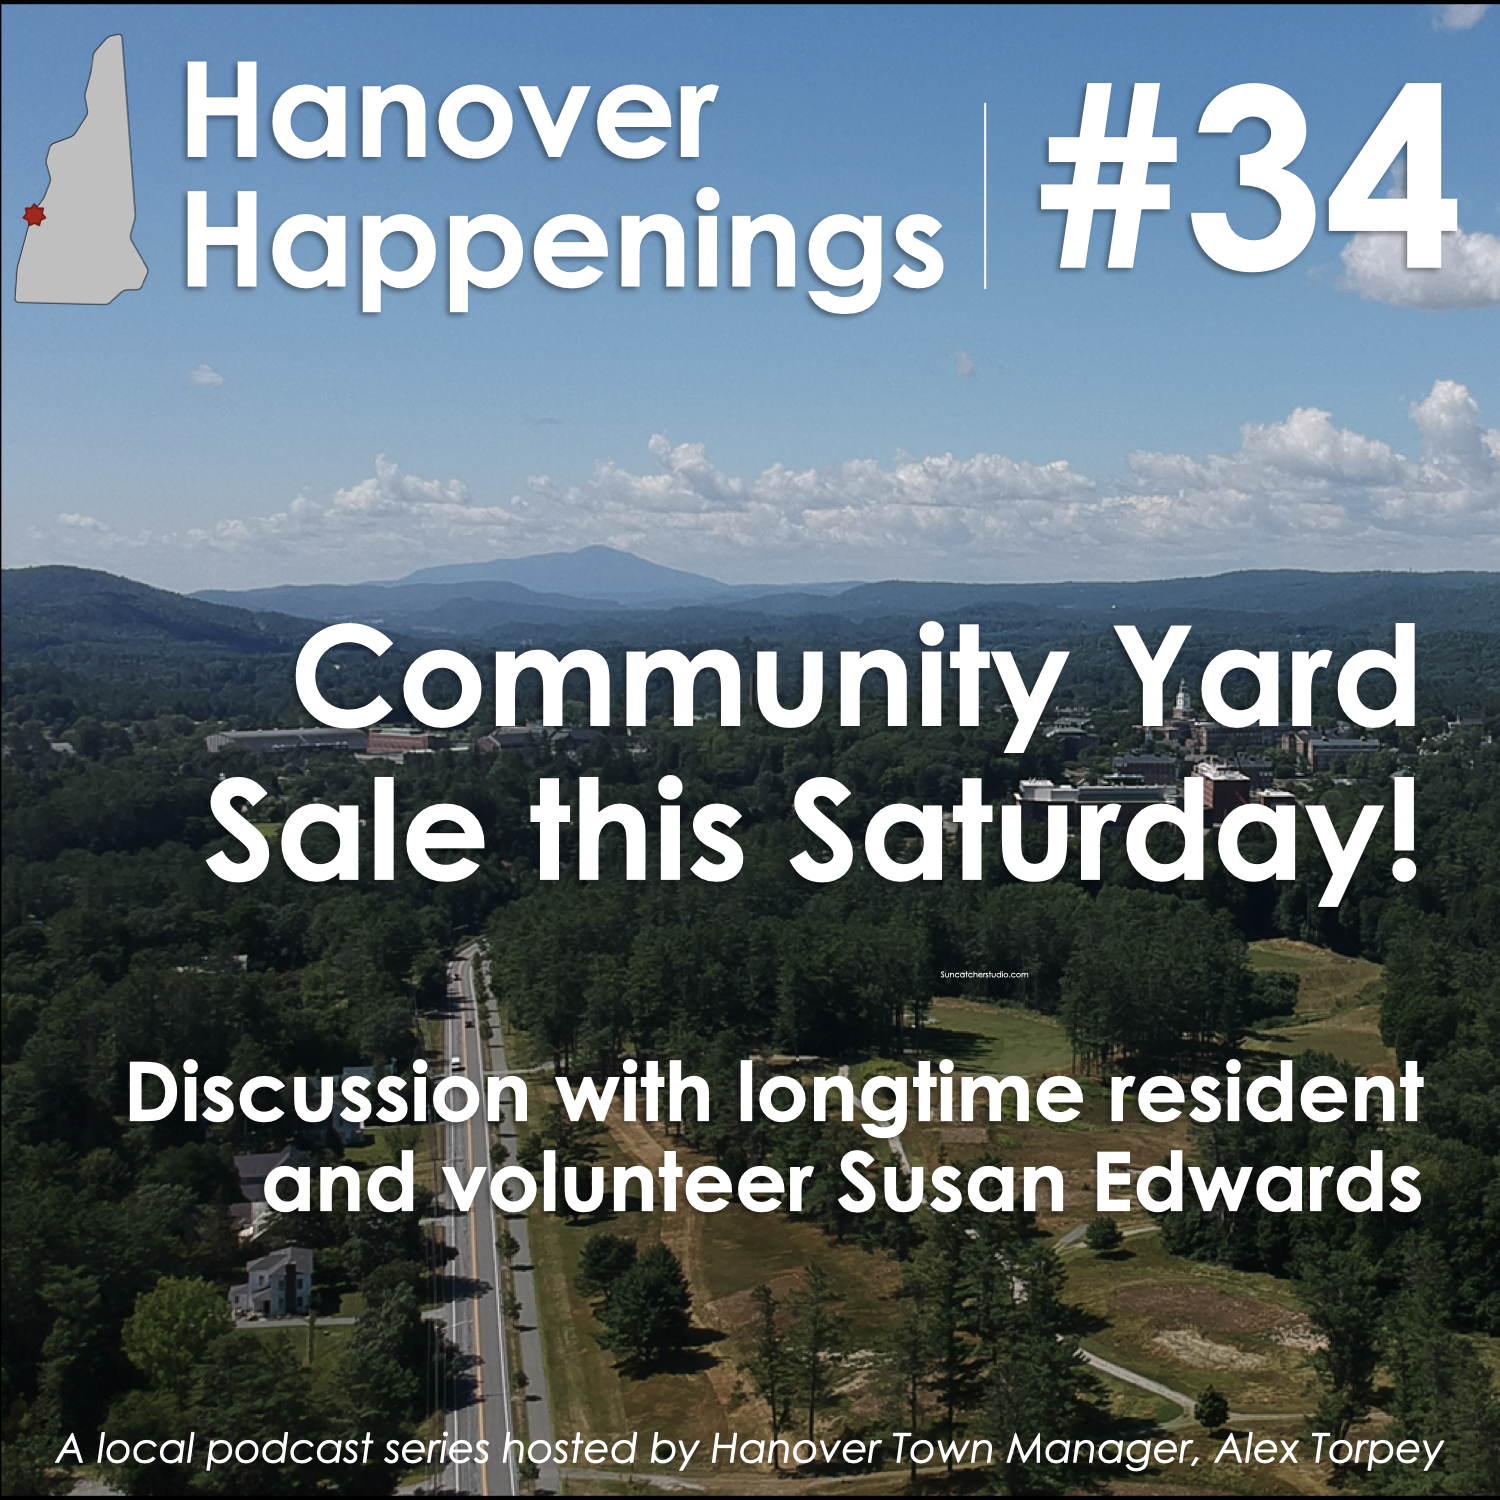 Community Yard Sale this Saturday and a discussion with Susan Edwards